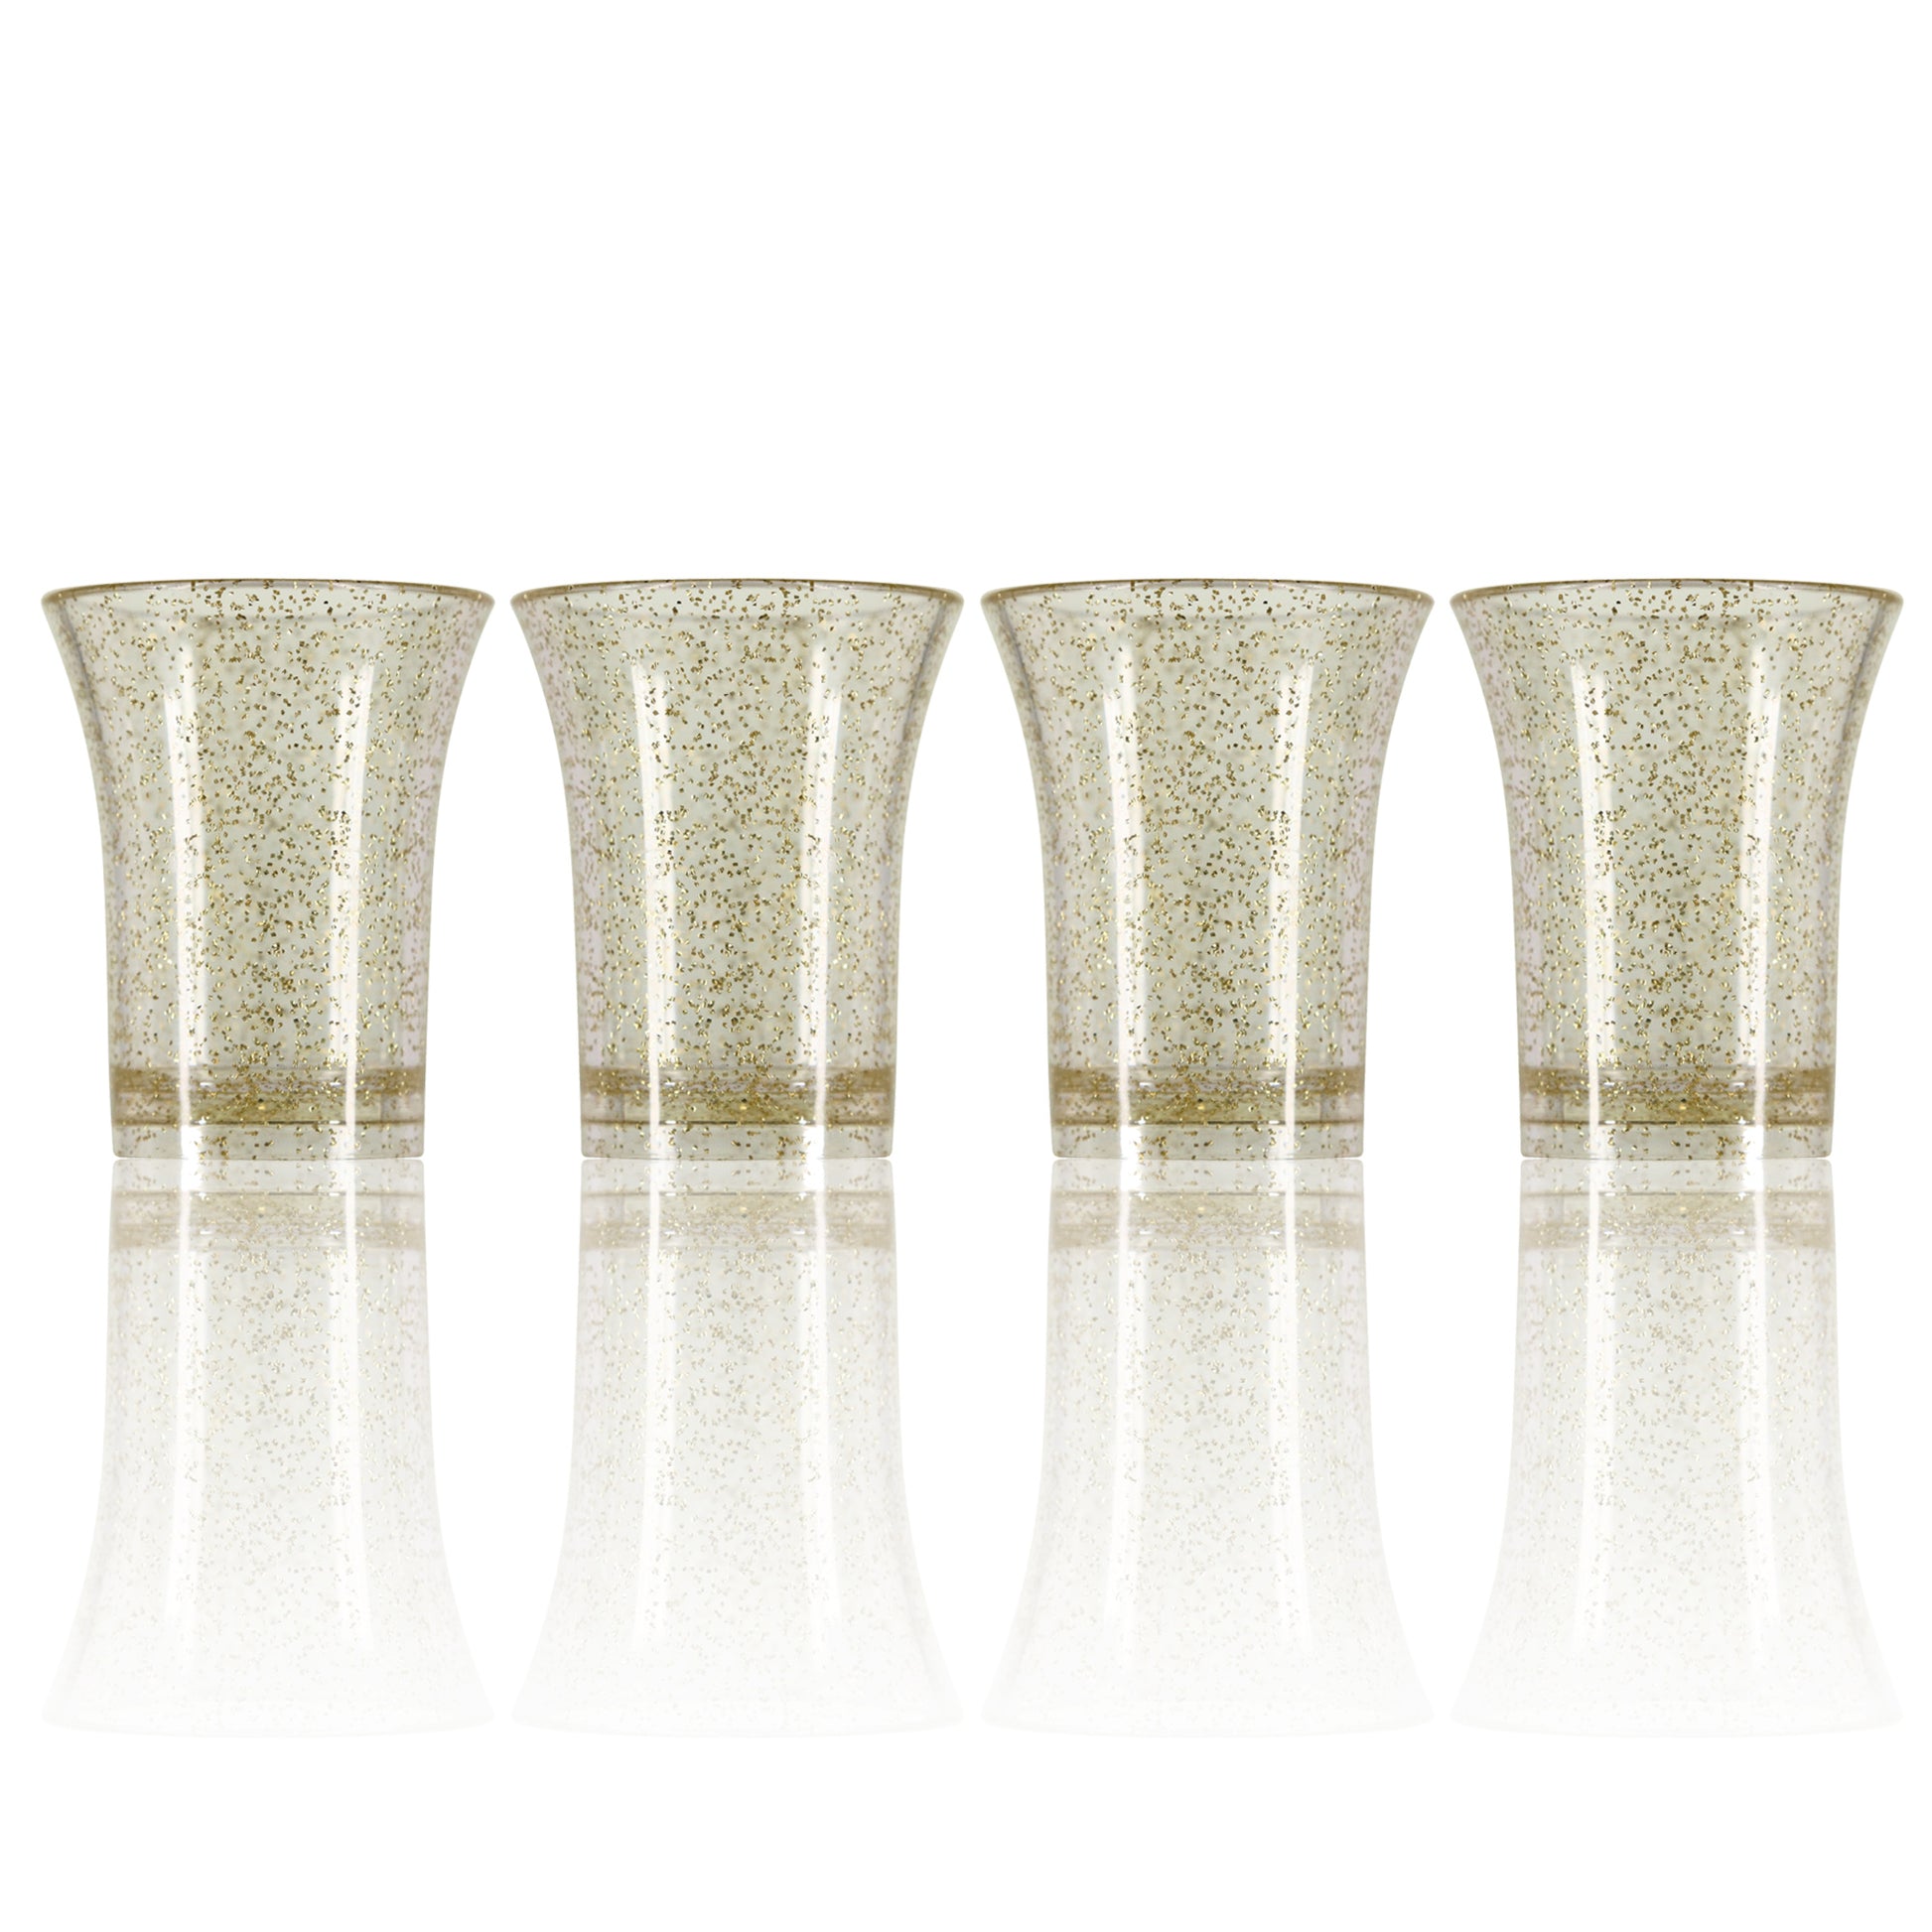 20 x Gold Glitter Shot Glasses - Heavy Duty Strong Reusable Plastic 25ml 30ml Stackable. Dishwasher Safe Christmas, Anniversaries, Sparkly-5056020182900-PCUP-SHOT-GG-20-Product Pro-Anniversary, Christmas, Glitter Shot Glasses, Gold, Gold Glitter, Shot Glasses, Shots